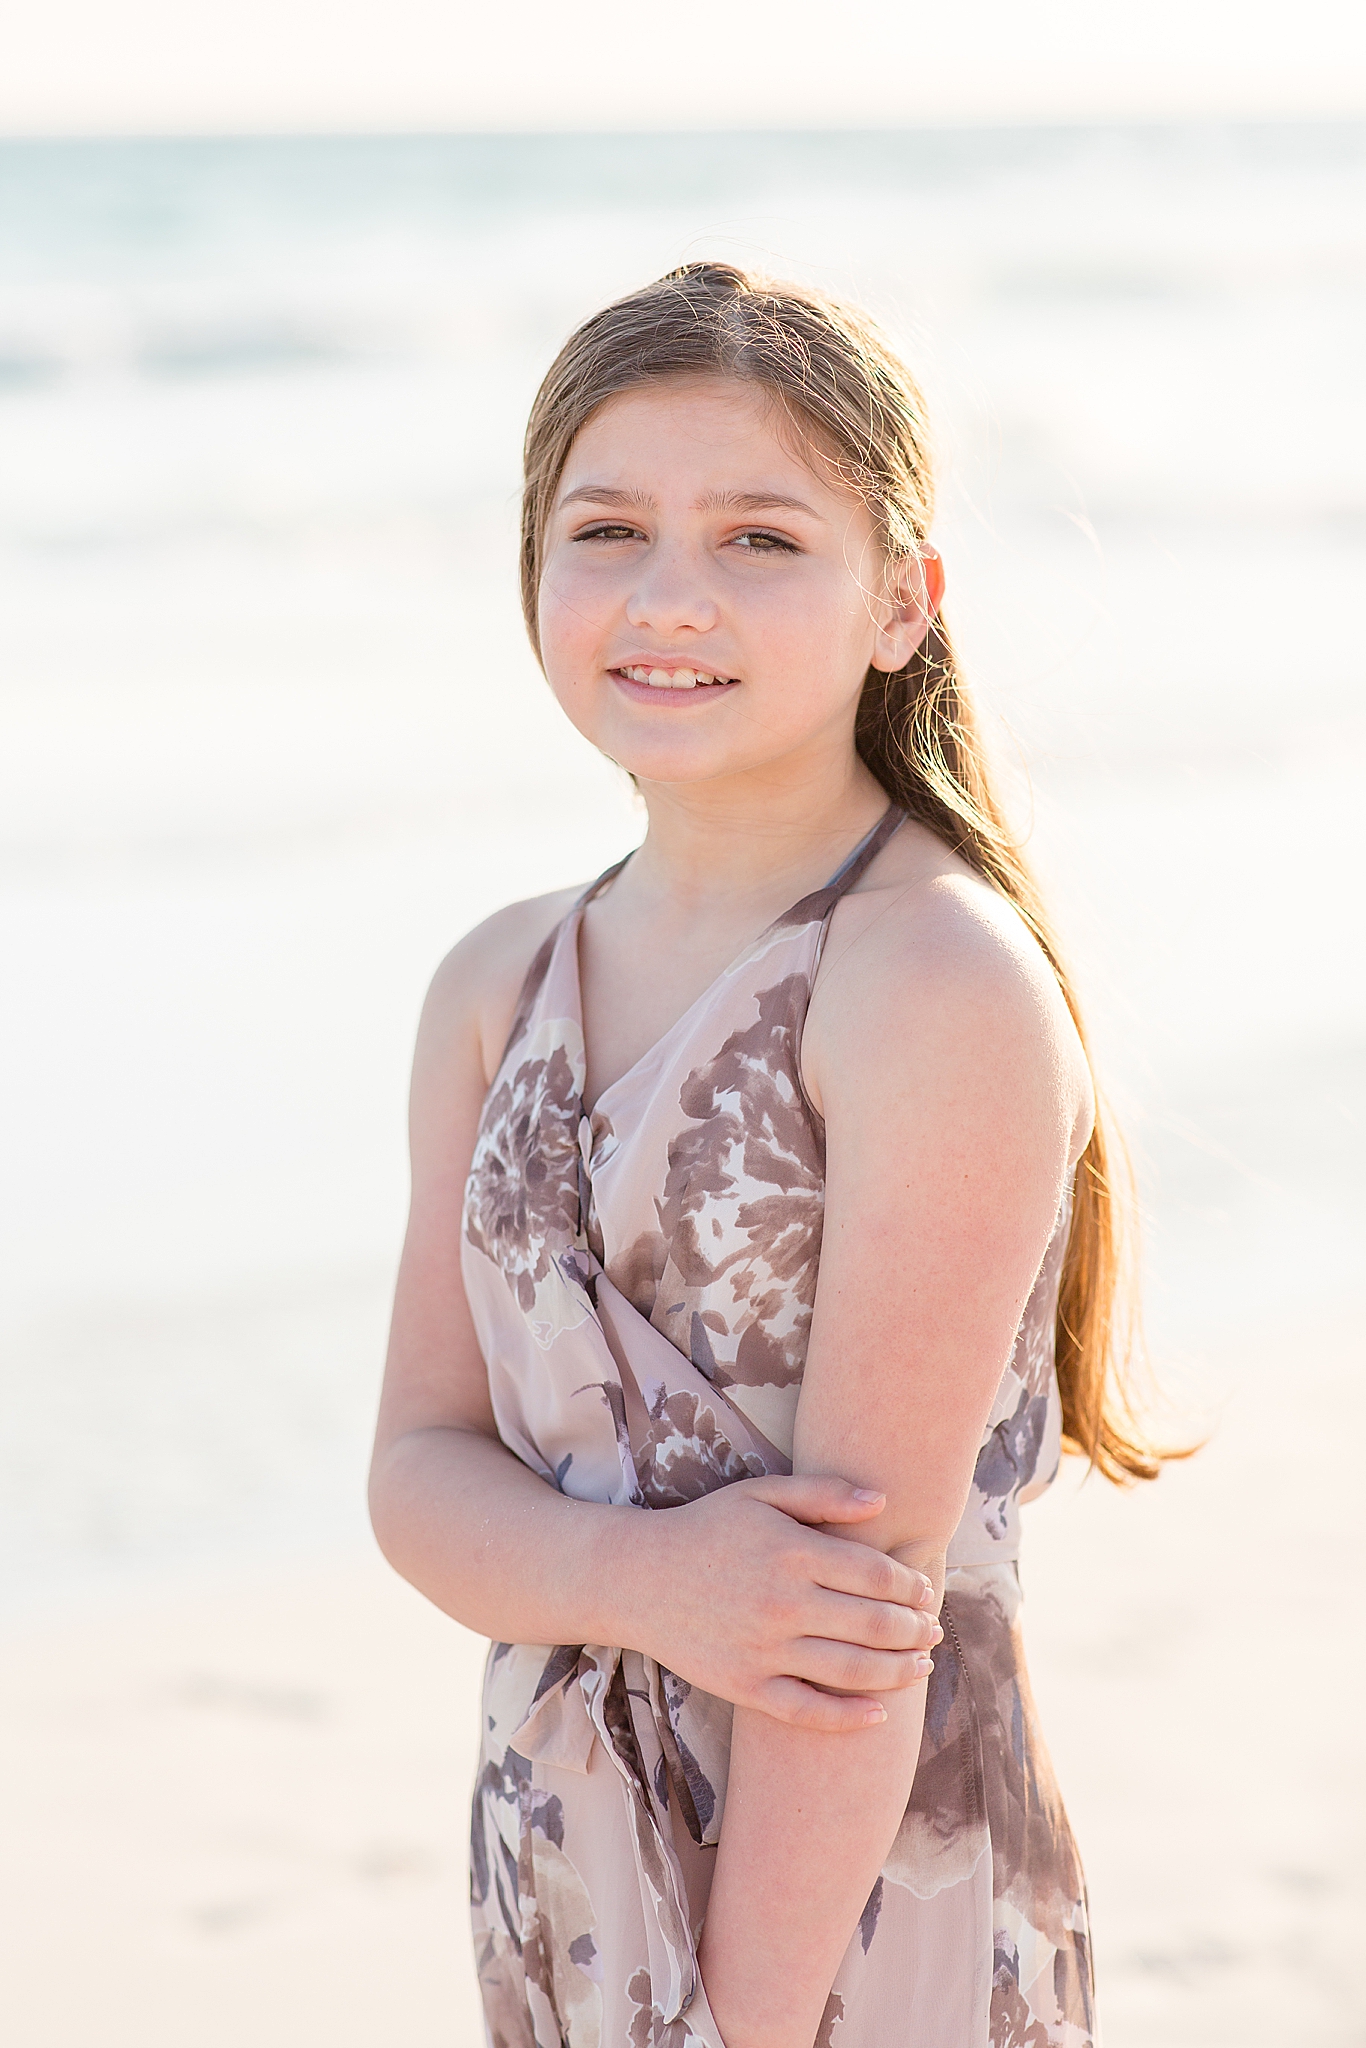 young girl smiles on beach in Florida